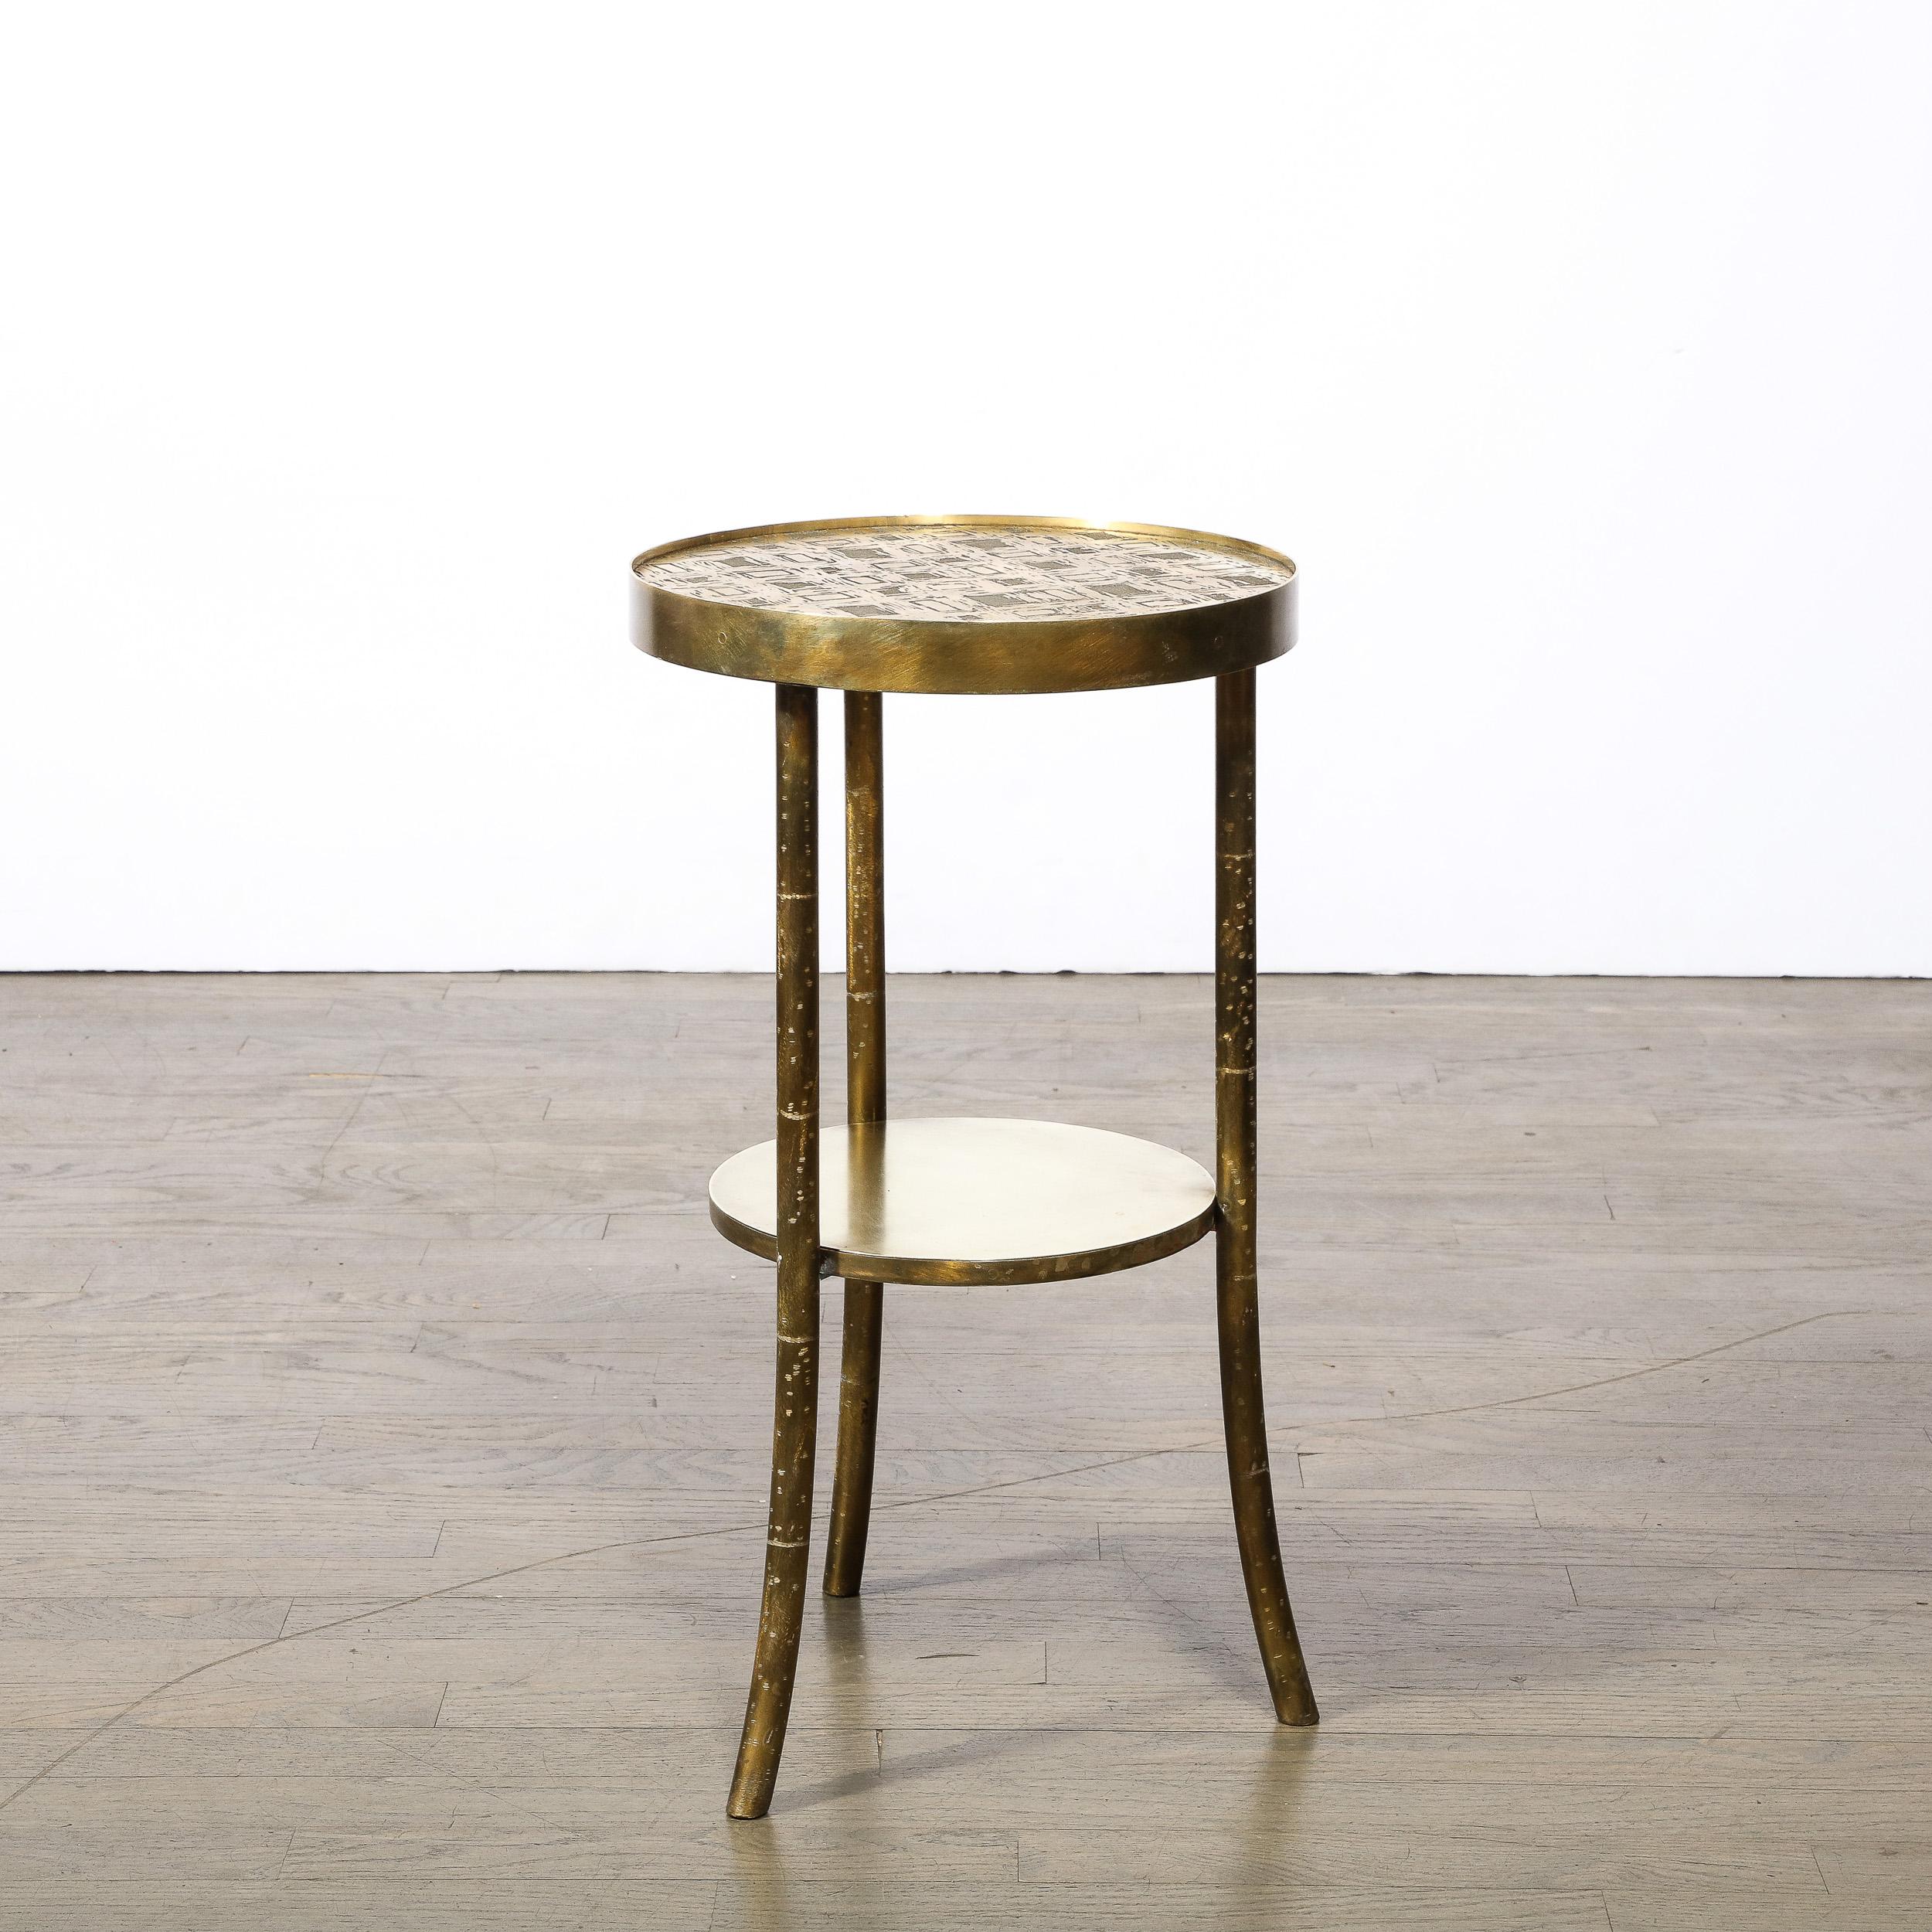 Mid-20th Century Mid-Century Modernist Patinated Bronze & Hand-Etched End Table, Philip Laverne